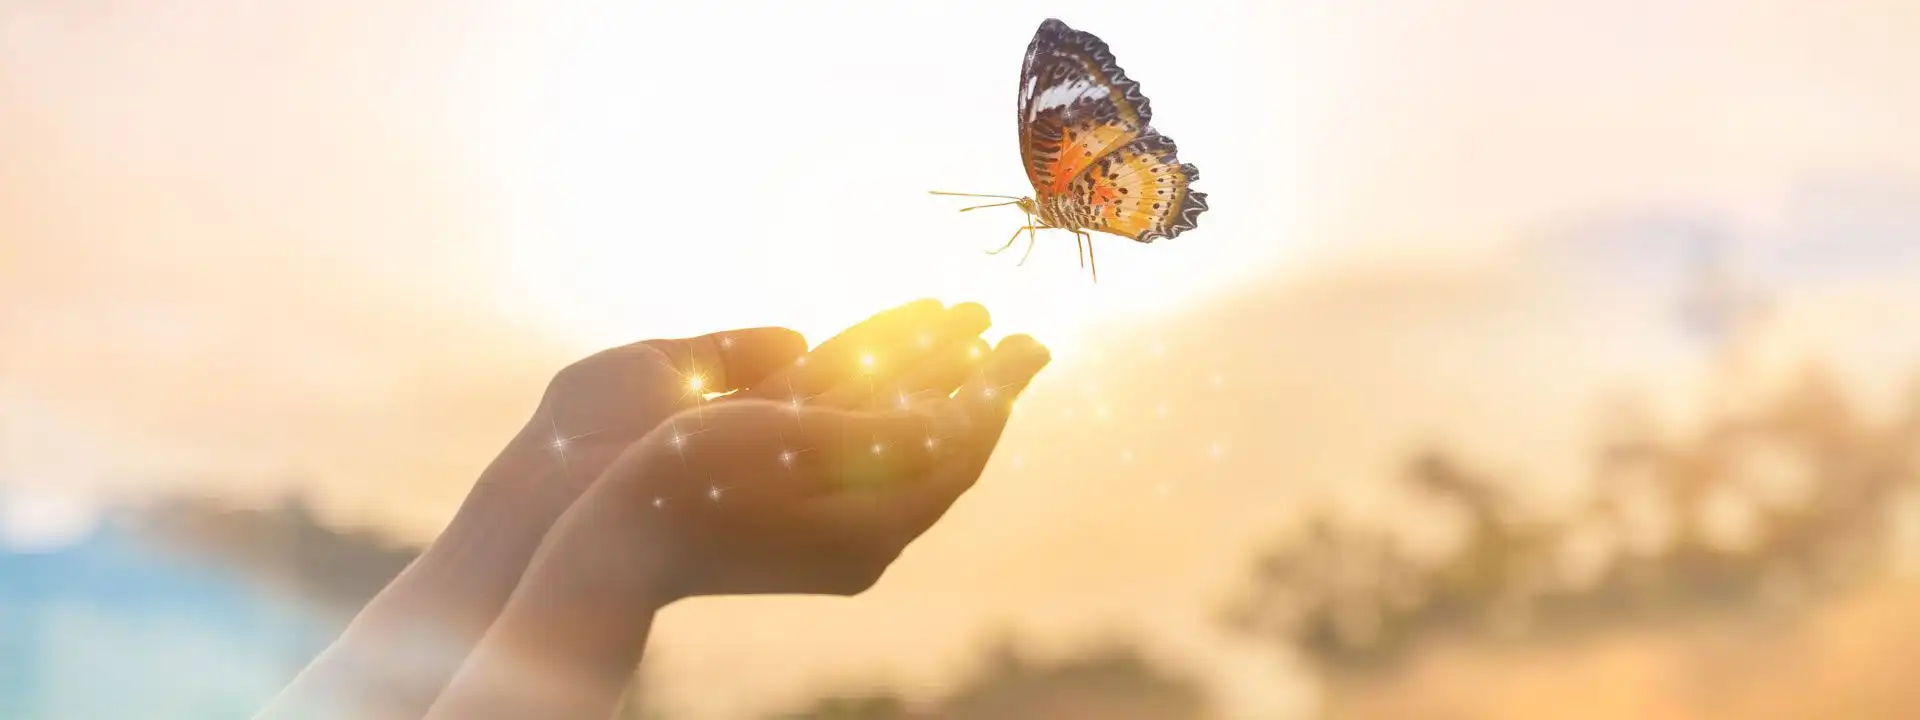 cupped hands releasing a monarch butterfly into the sunlit sky